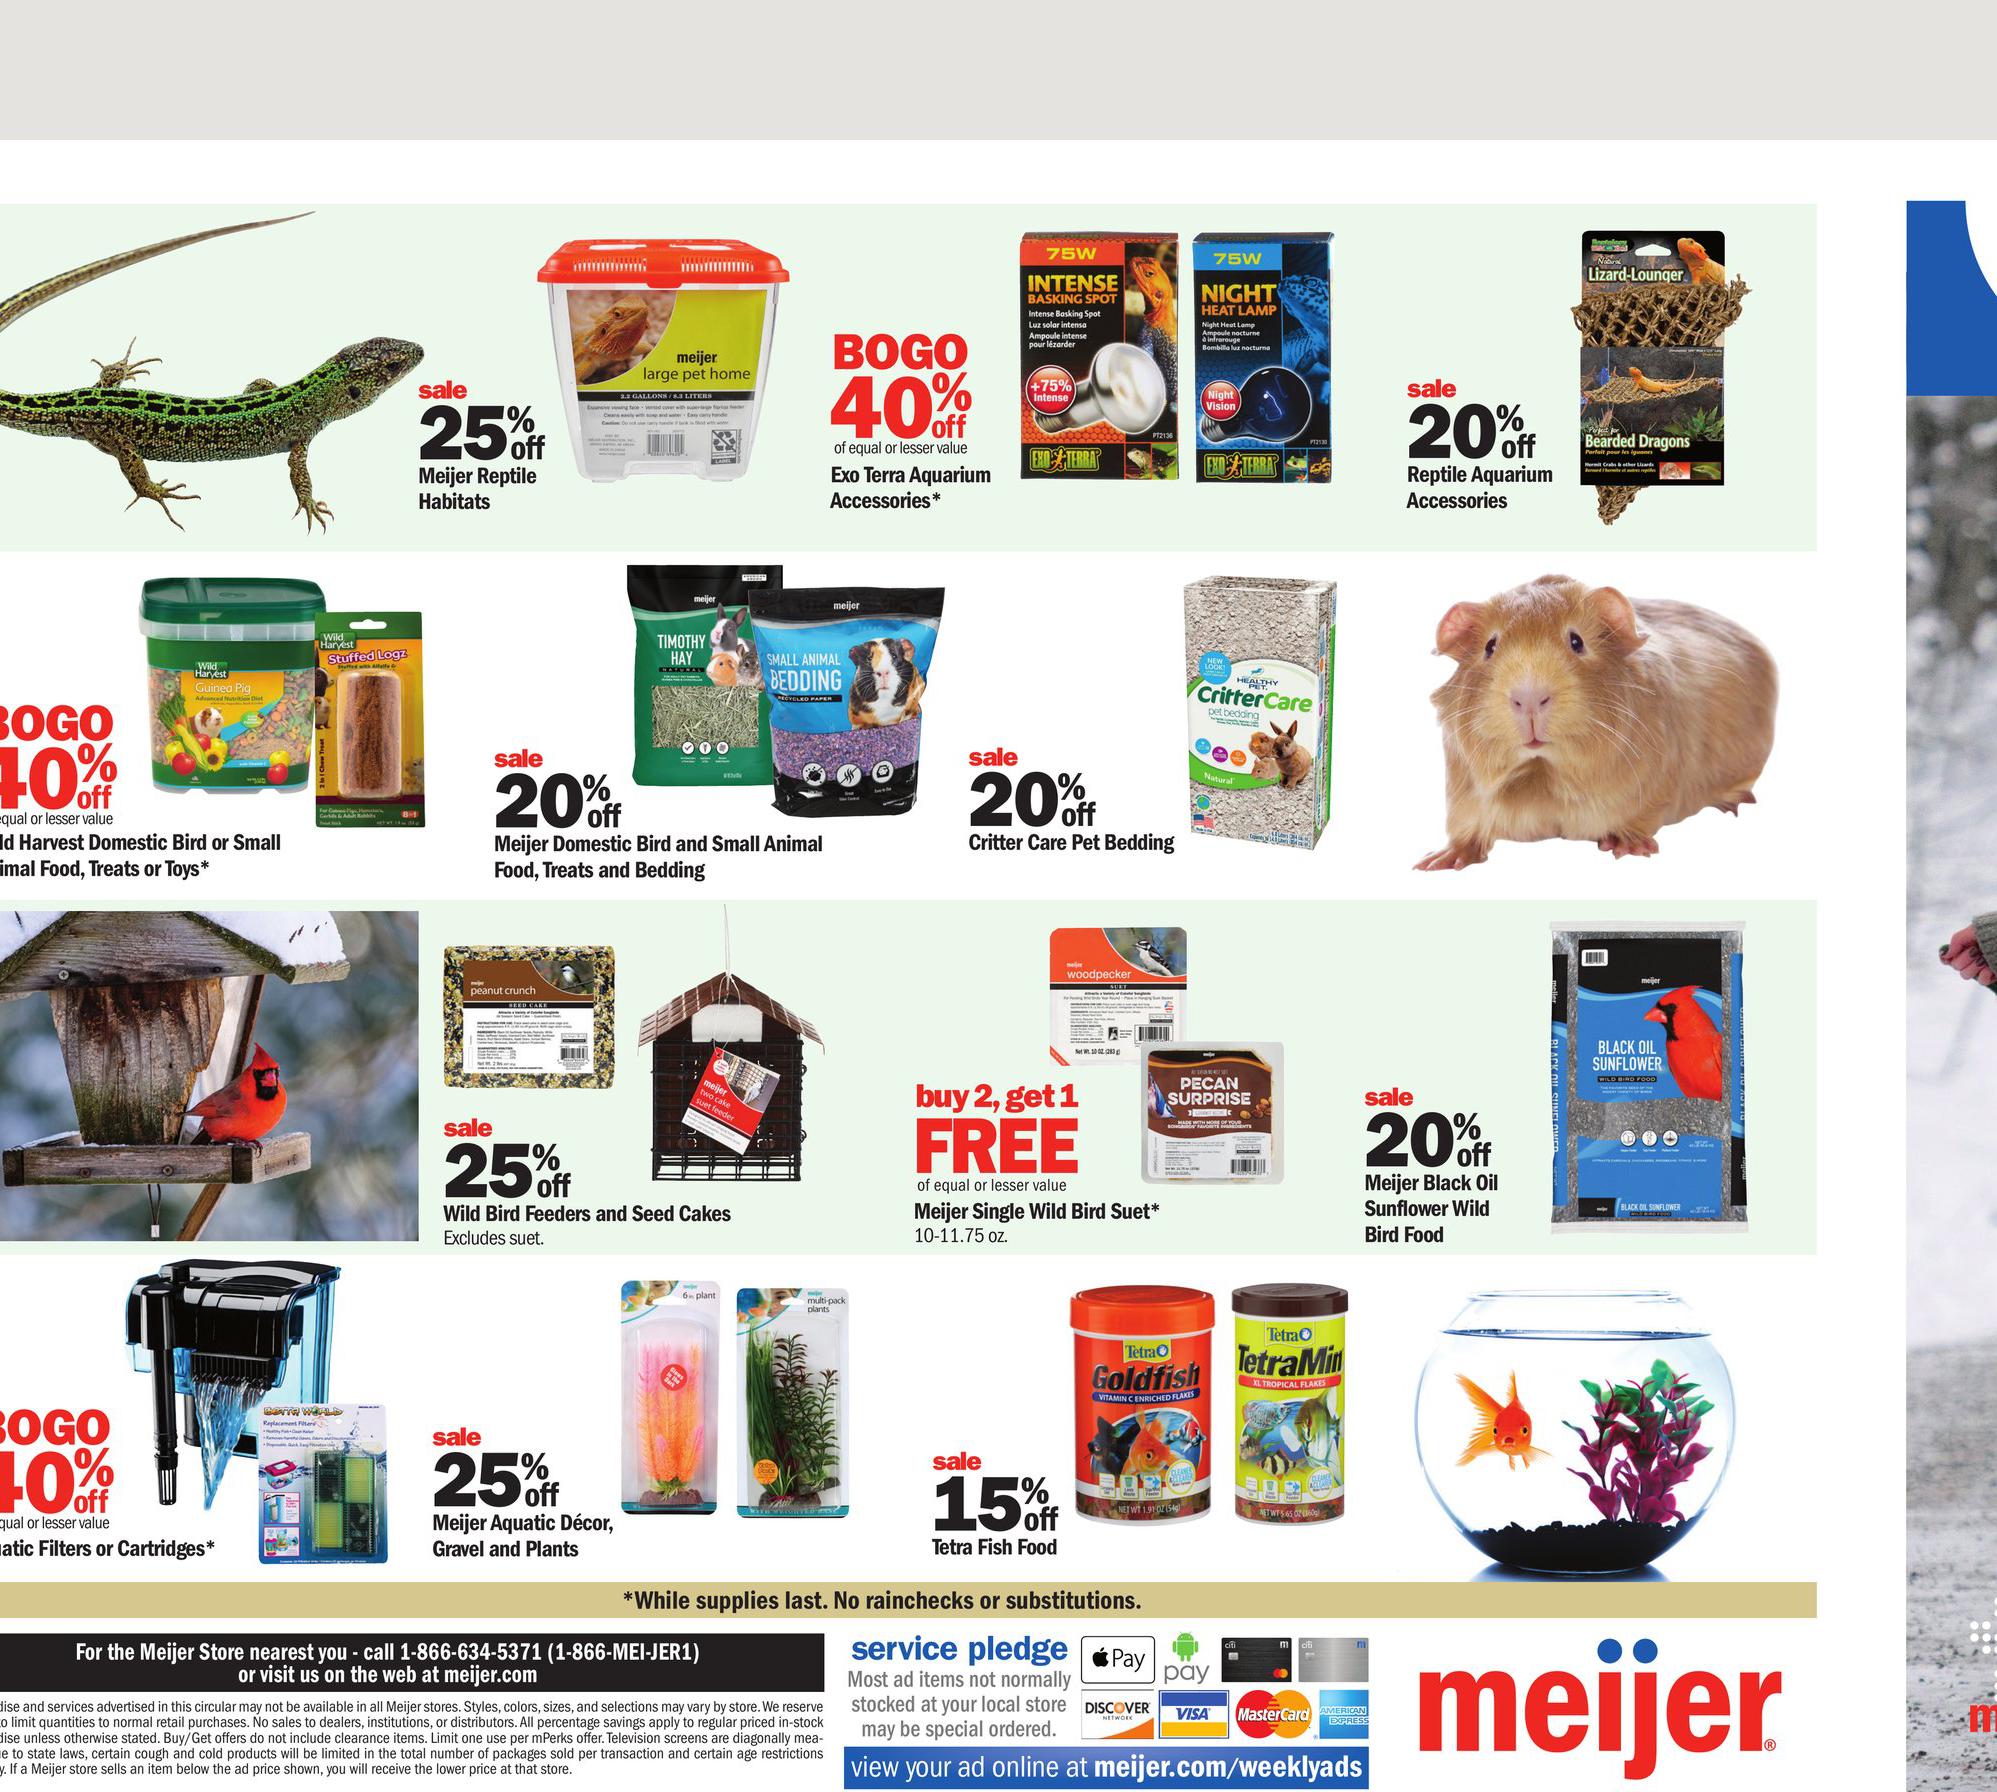 09.01.2022 Meijer ad 4. page